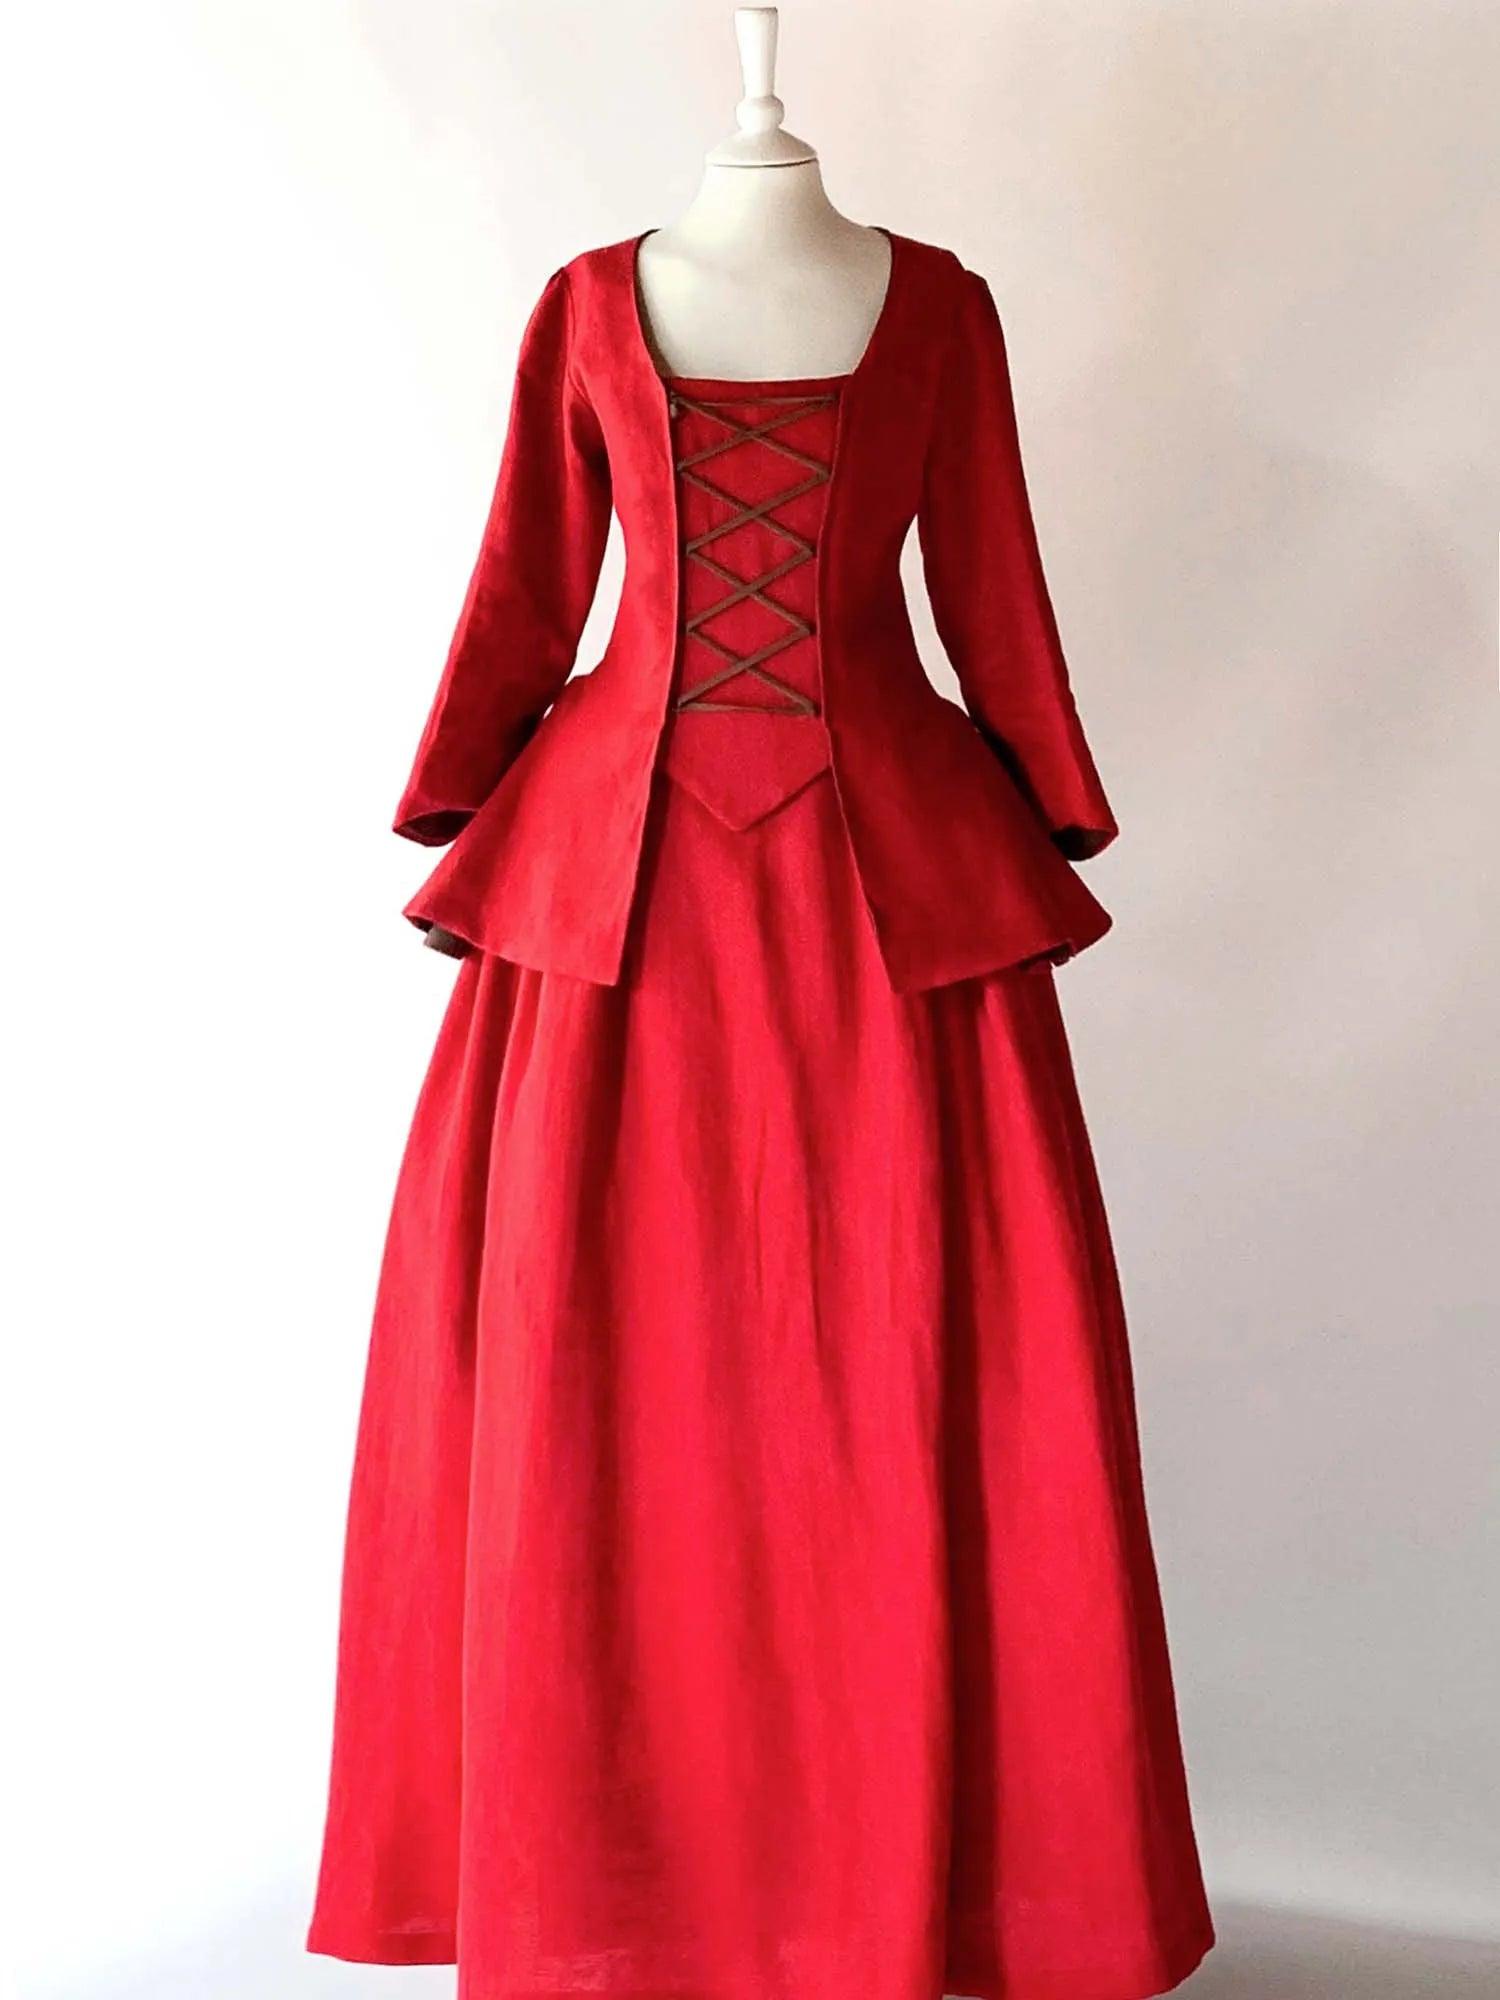 JANET, Colonial Costume in Cherry Red Linen - Atelier Serraspina - Costume 18ème siècle en Lin Rouge Cerise